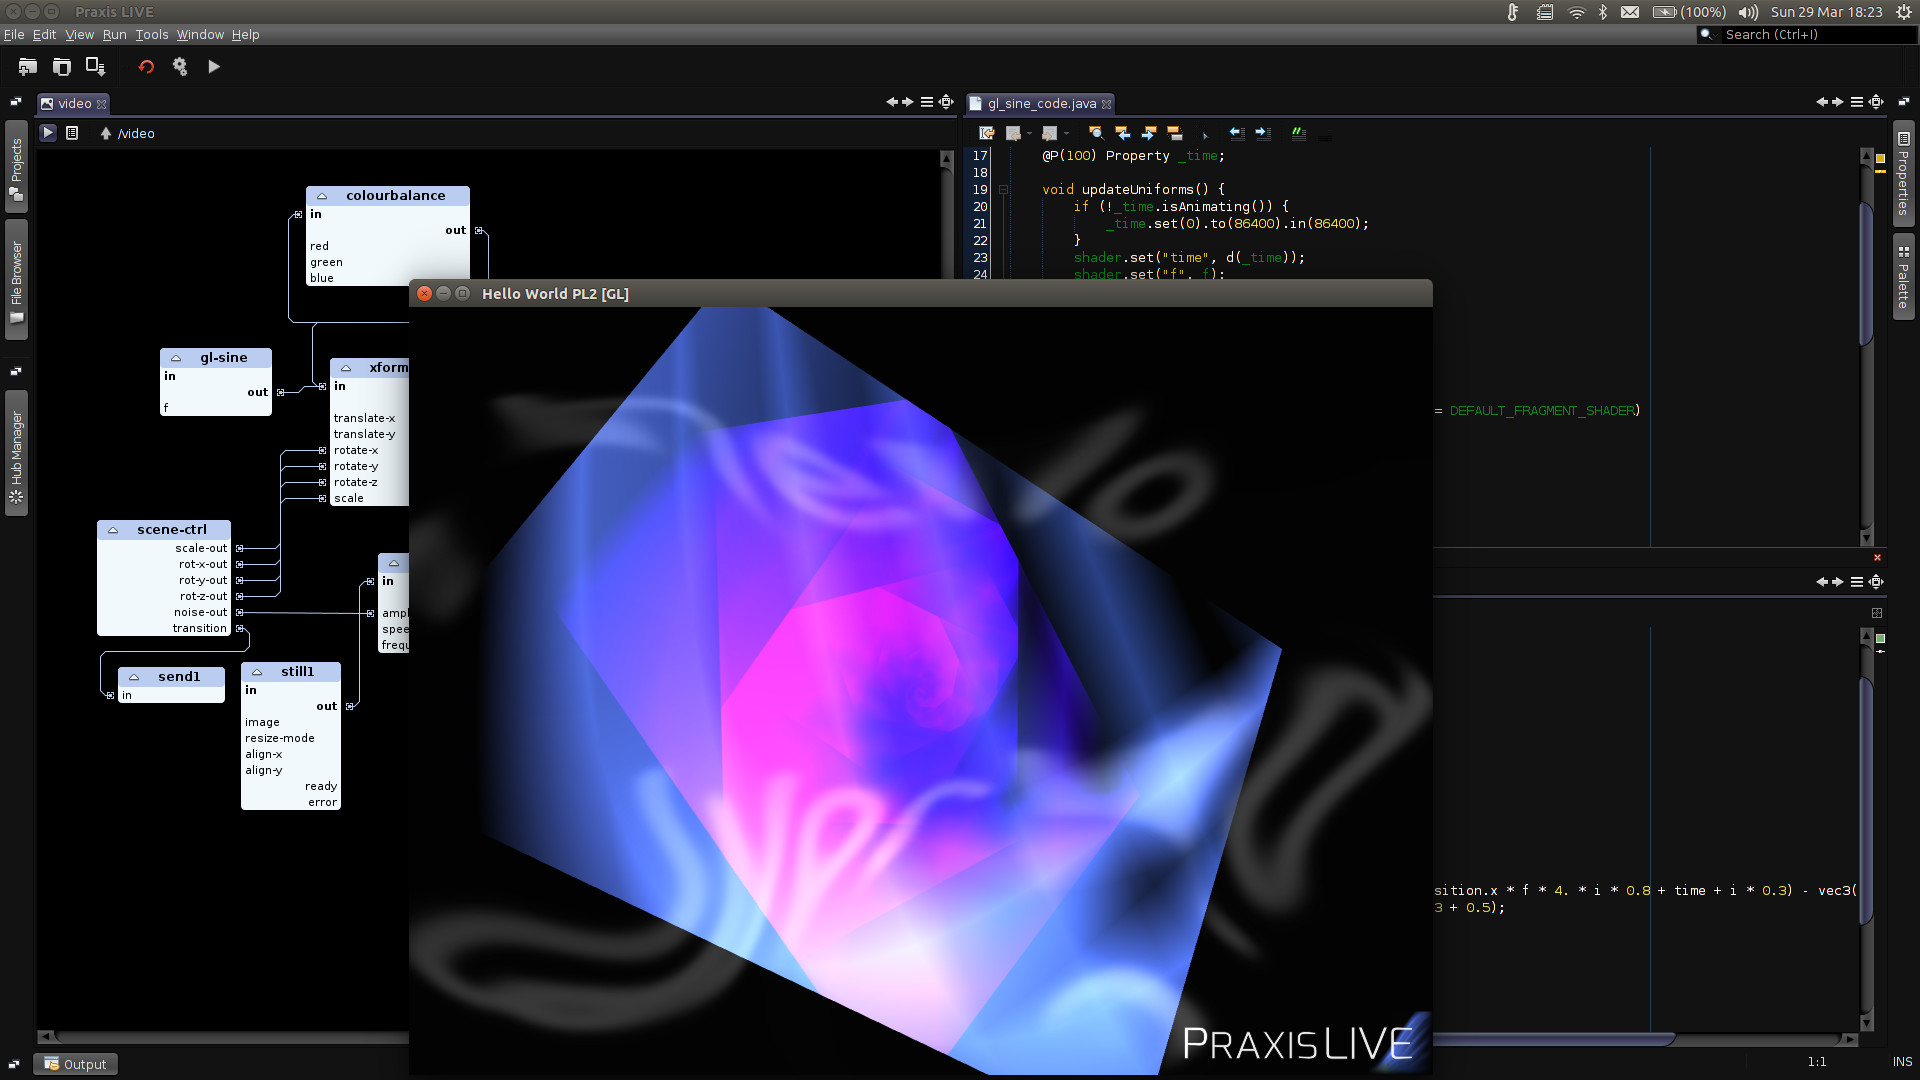 Praxis LIVE for Linux 5.7.0 full